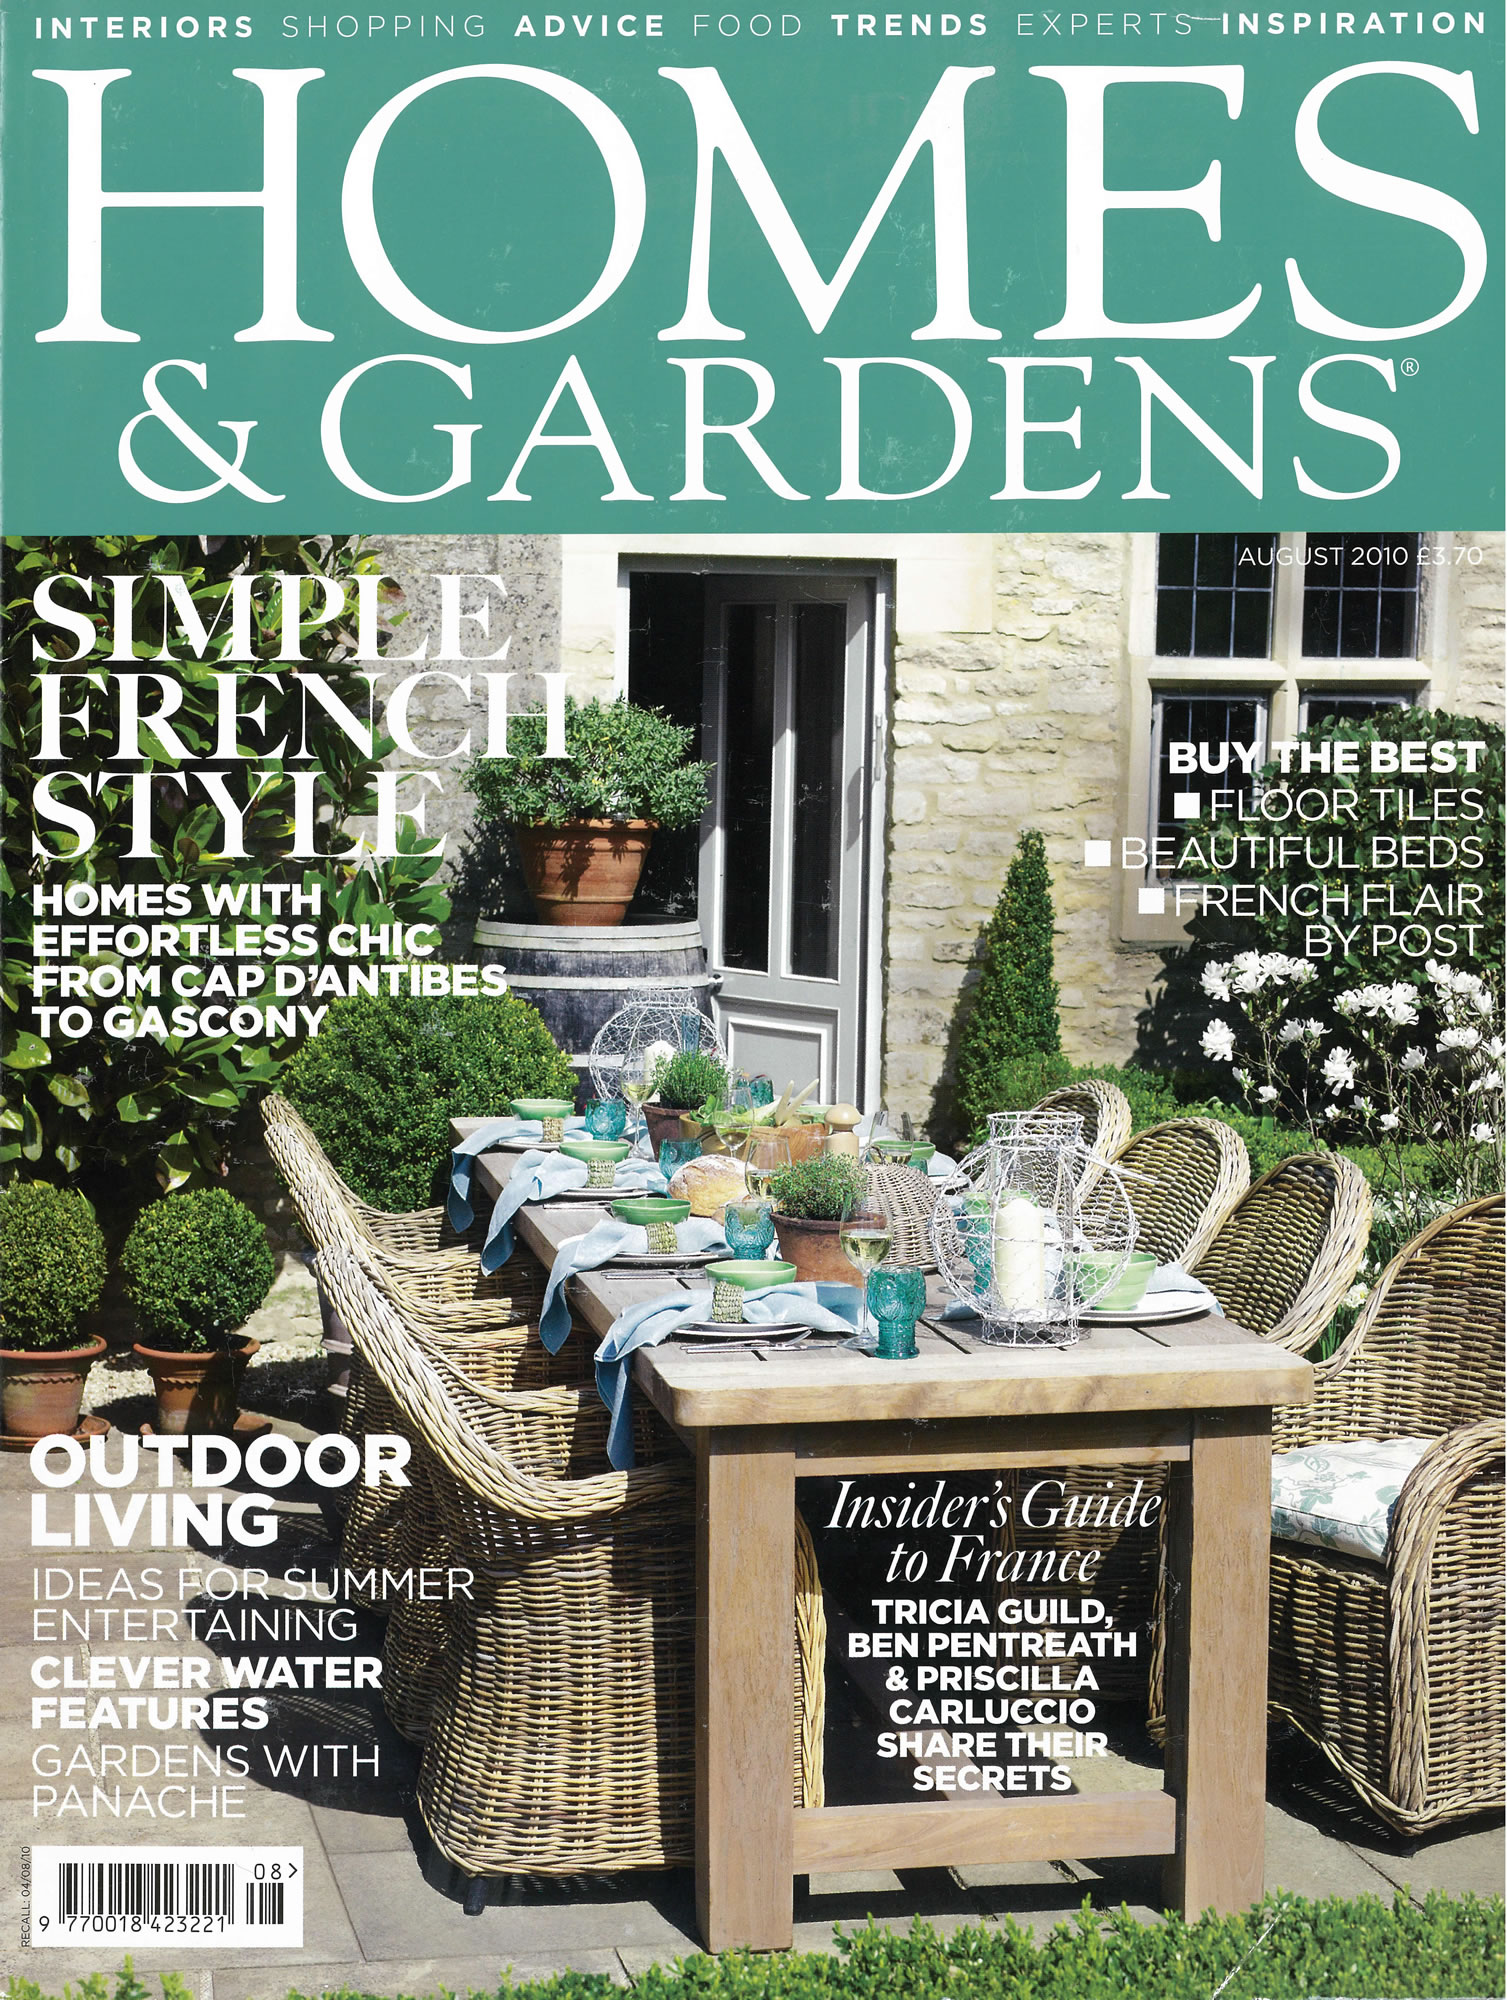 Homes & Gardens FP August 2010